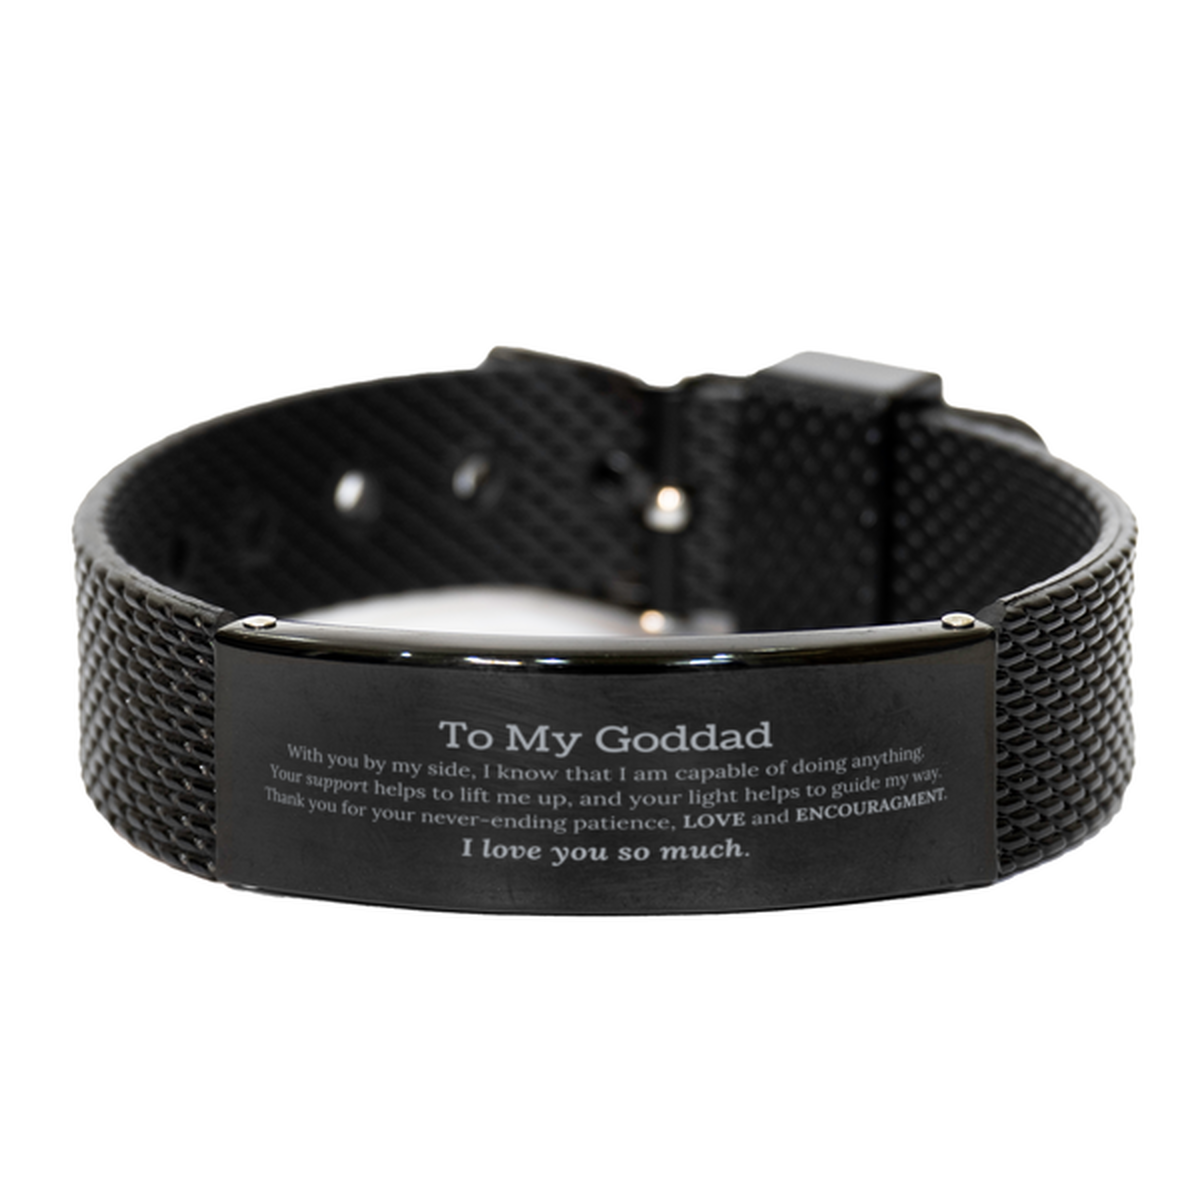 Appreciation Goddad Black Shark Mesh Bracelet Gifts, To My Goddad Birthday Christmas Wedding Keepsake Gifts for Goddad With you by my side, I know that I am capable of doing anything. I love you so much